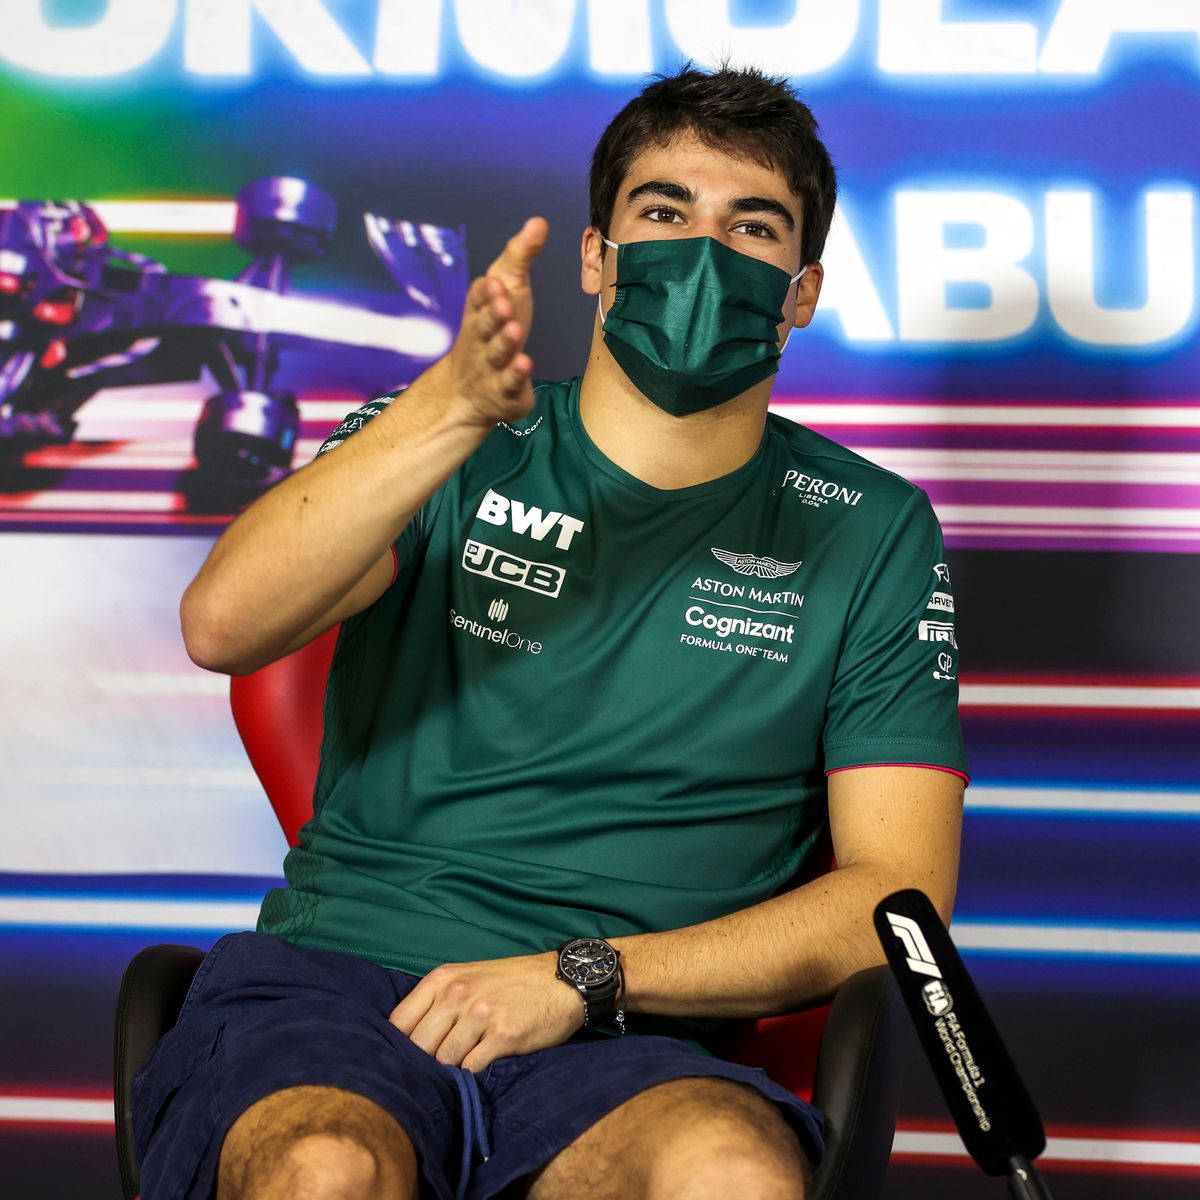 Lance Stroll speaking at a press conference in Abu Dhabi Wallpaper